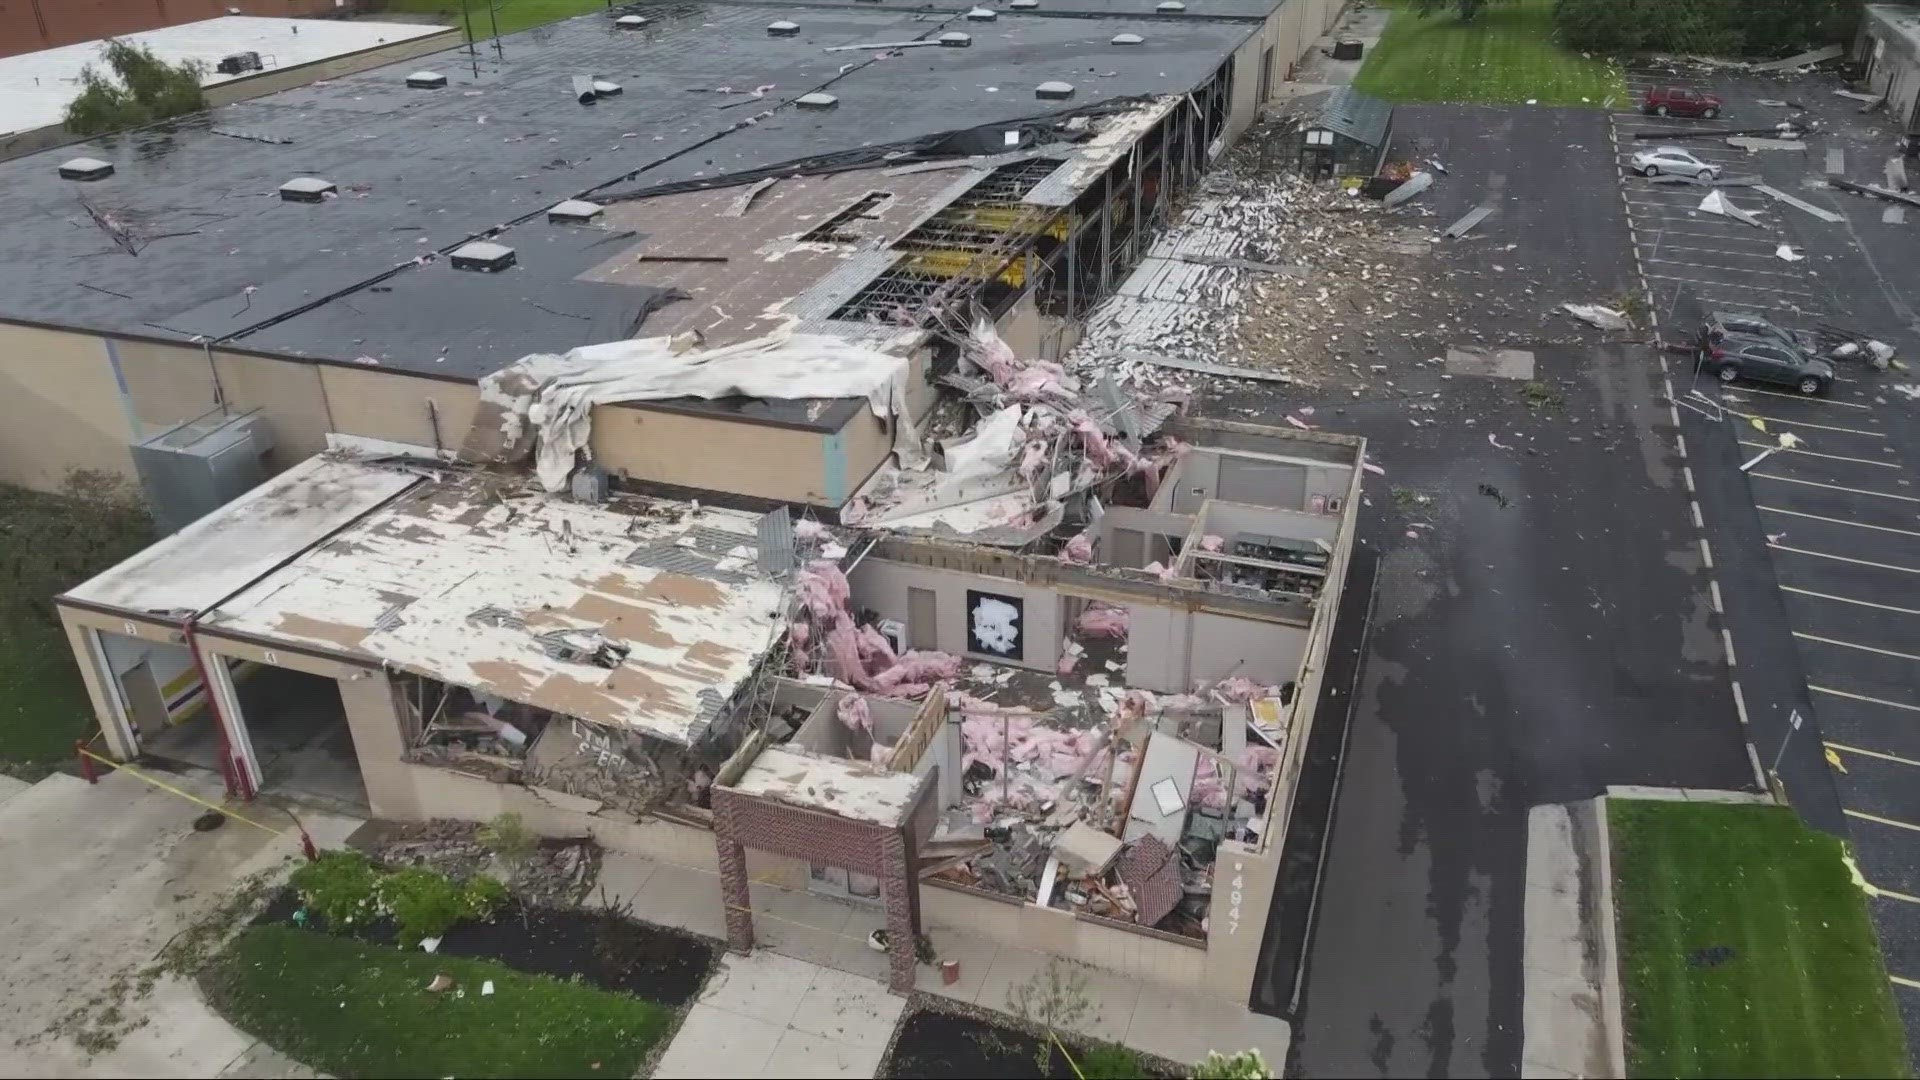 9 Confirmed tornadoes in Northeast Ohio